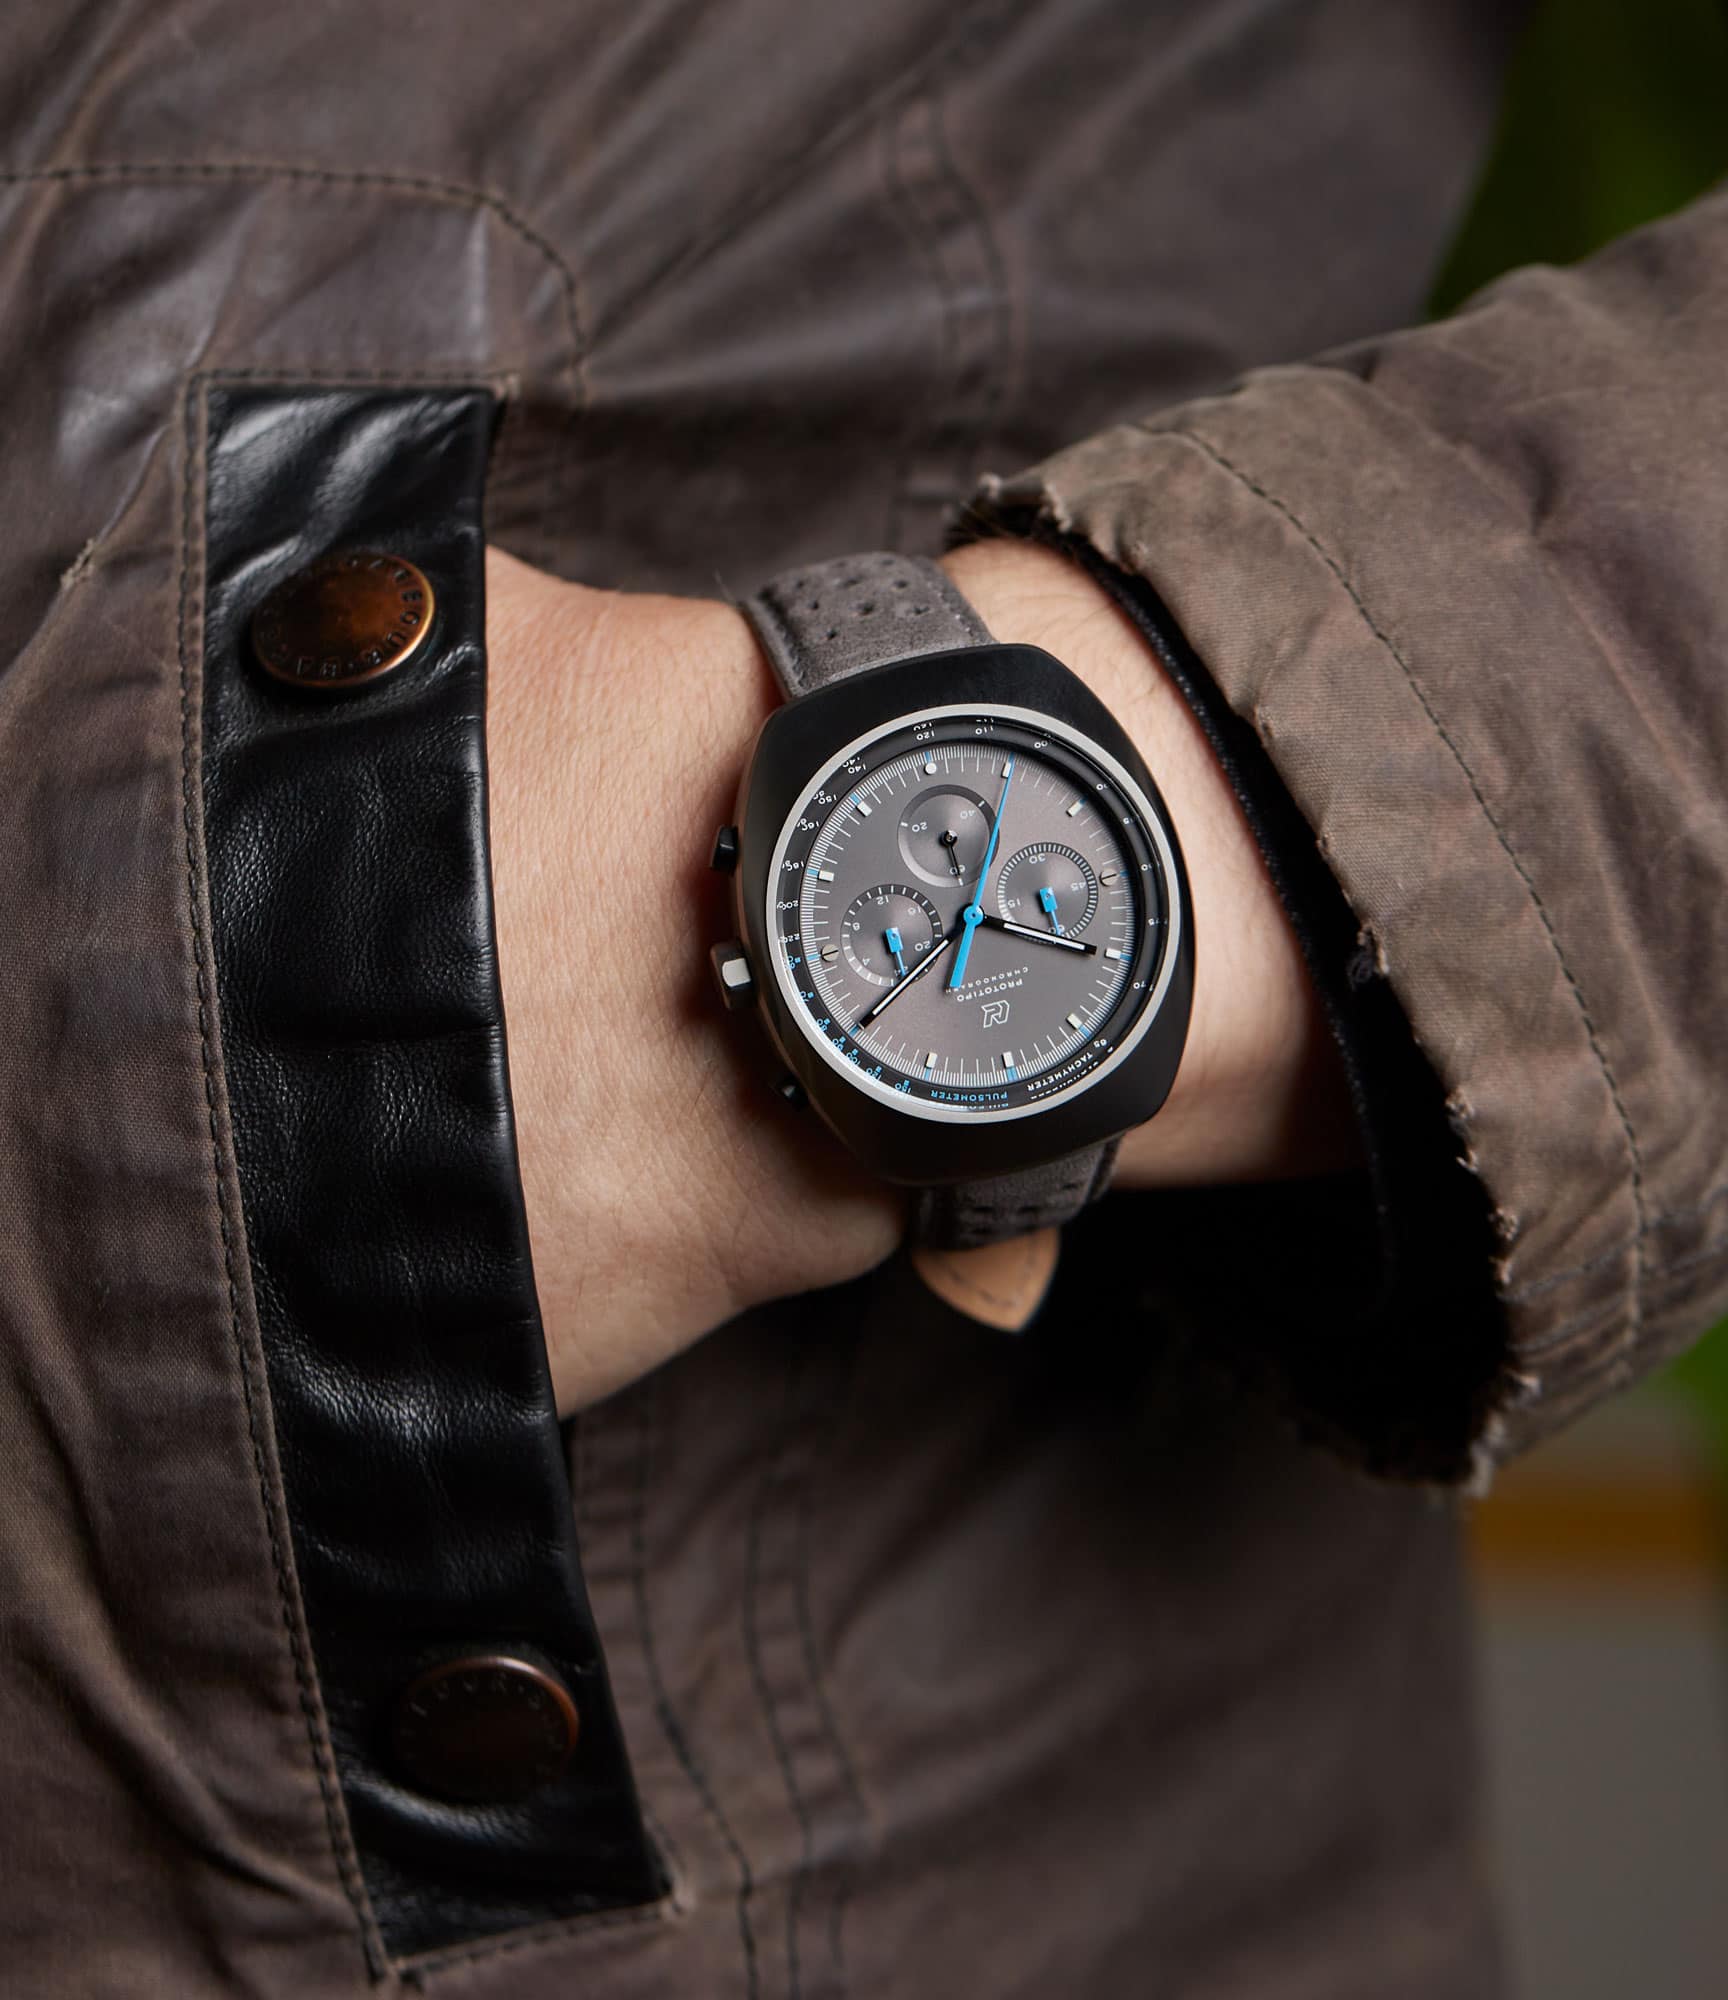 Introducing the Autodromo x Worn & Wound Prototipo Limited Edition ...